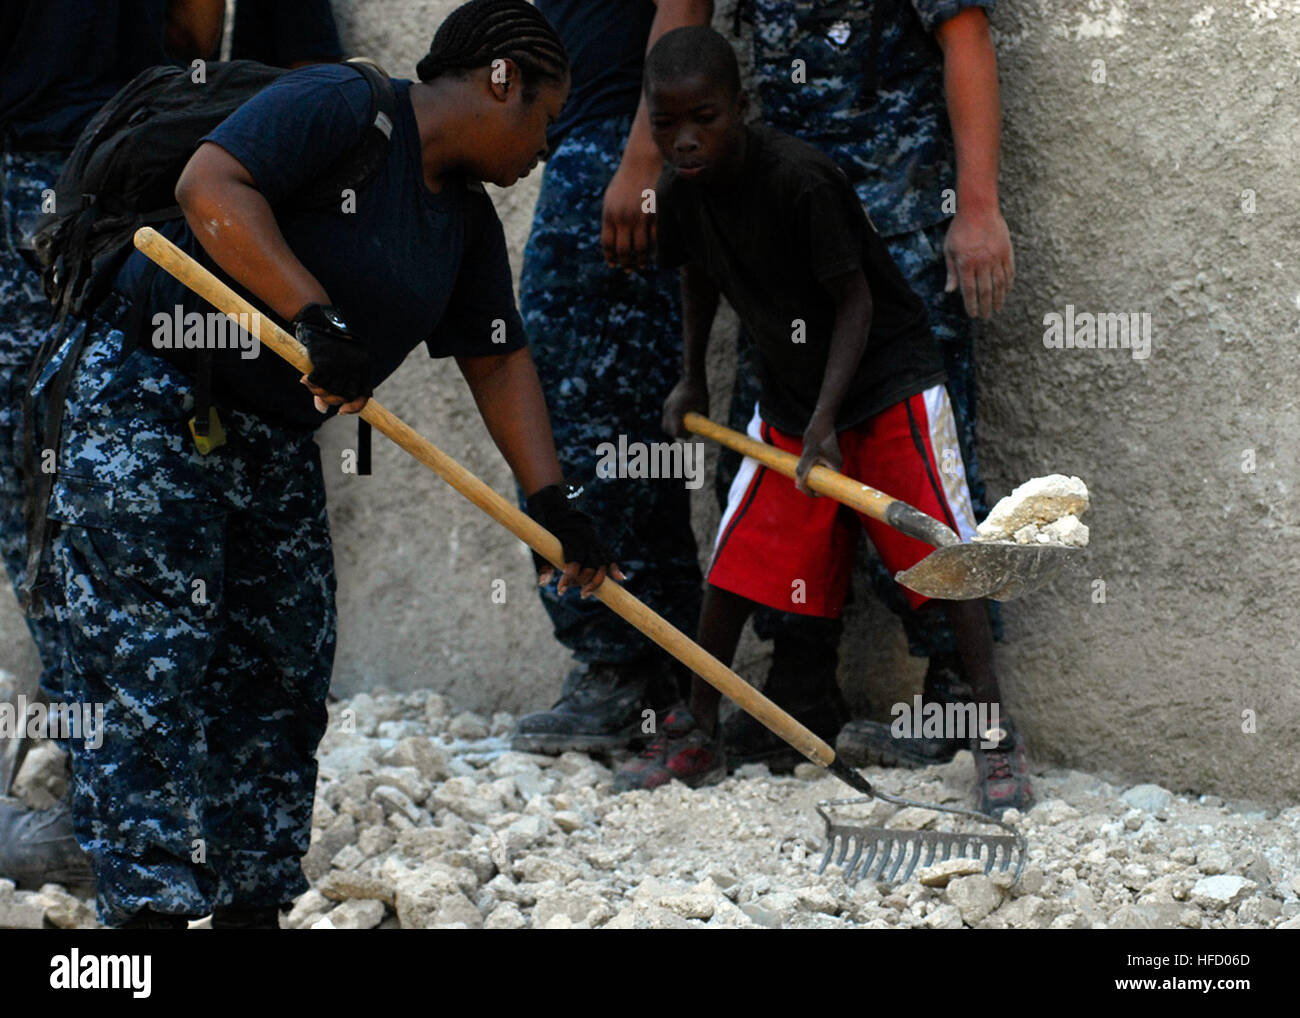 A Haitian boy helps Petty Officer 2nd Class Shaunte Stafford, an information systems technician assigned to Amphibious Construction Battalion 2, remove rubble from his former school. Amphibious Construction Battalion 2 is conducting humanitarian and disaster relief operations as part of Operation Unified Response after a 7.0 magnitude earthquake caused severe damage in and around Port-au-Prince, Haiti, Jan. 12. Sailors assist in Haiti 252961 Stock Photo